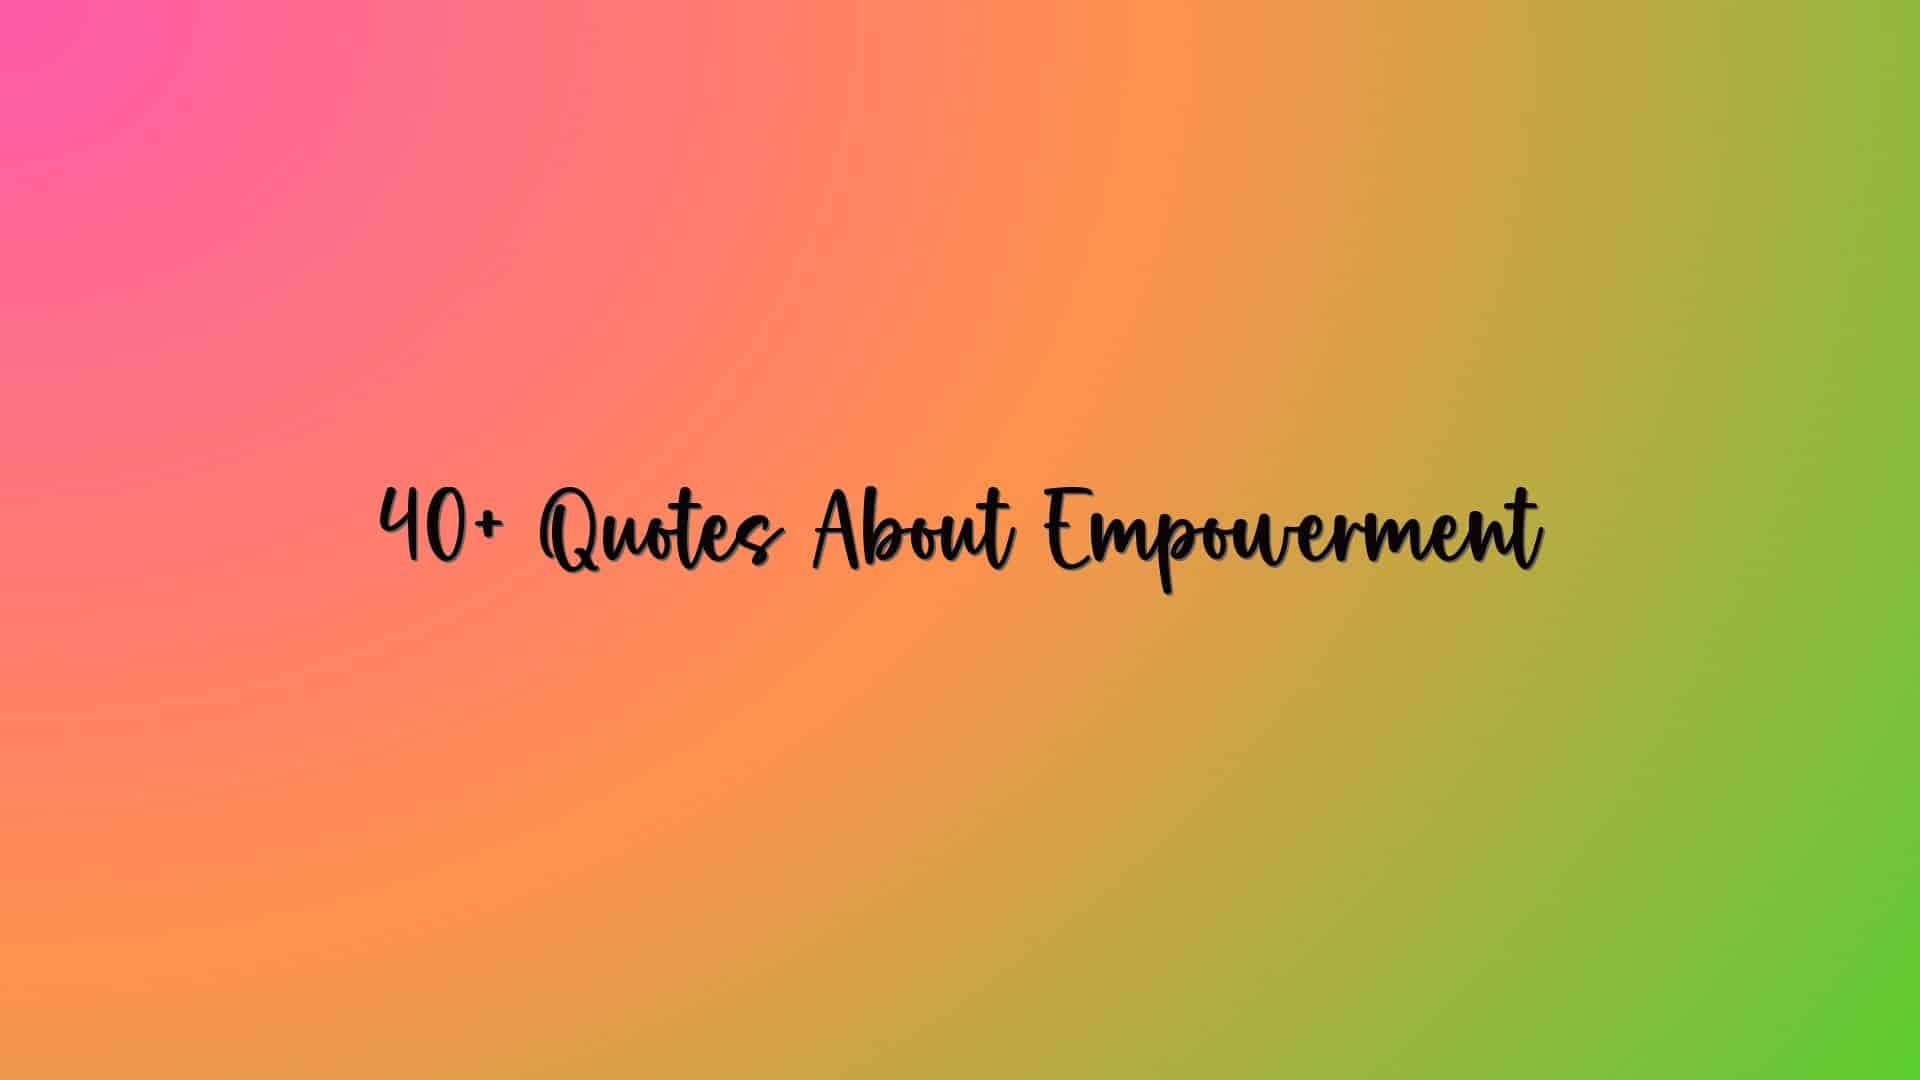 40+ Quotes About Empowerment